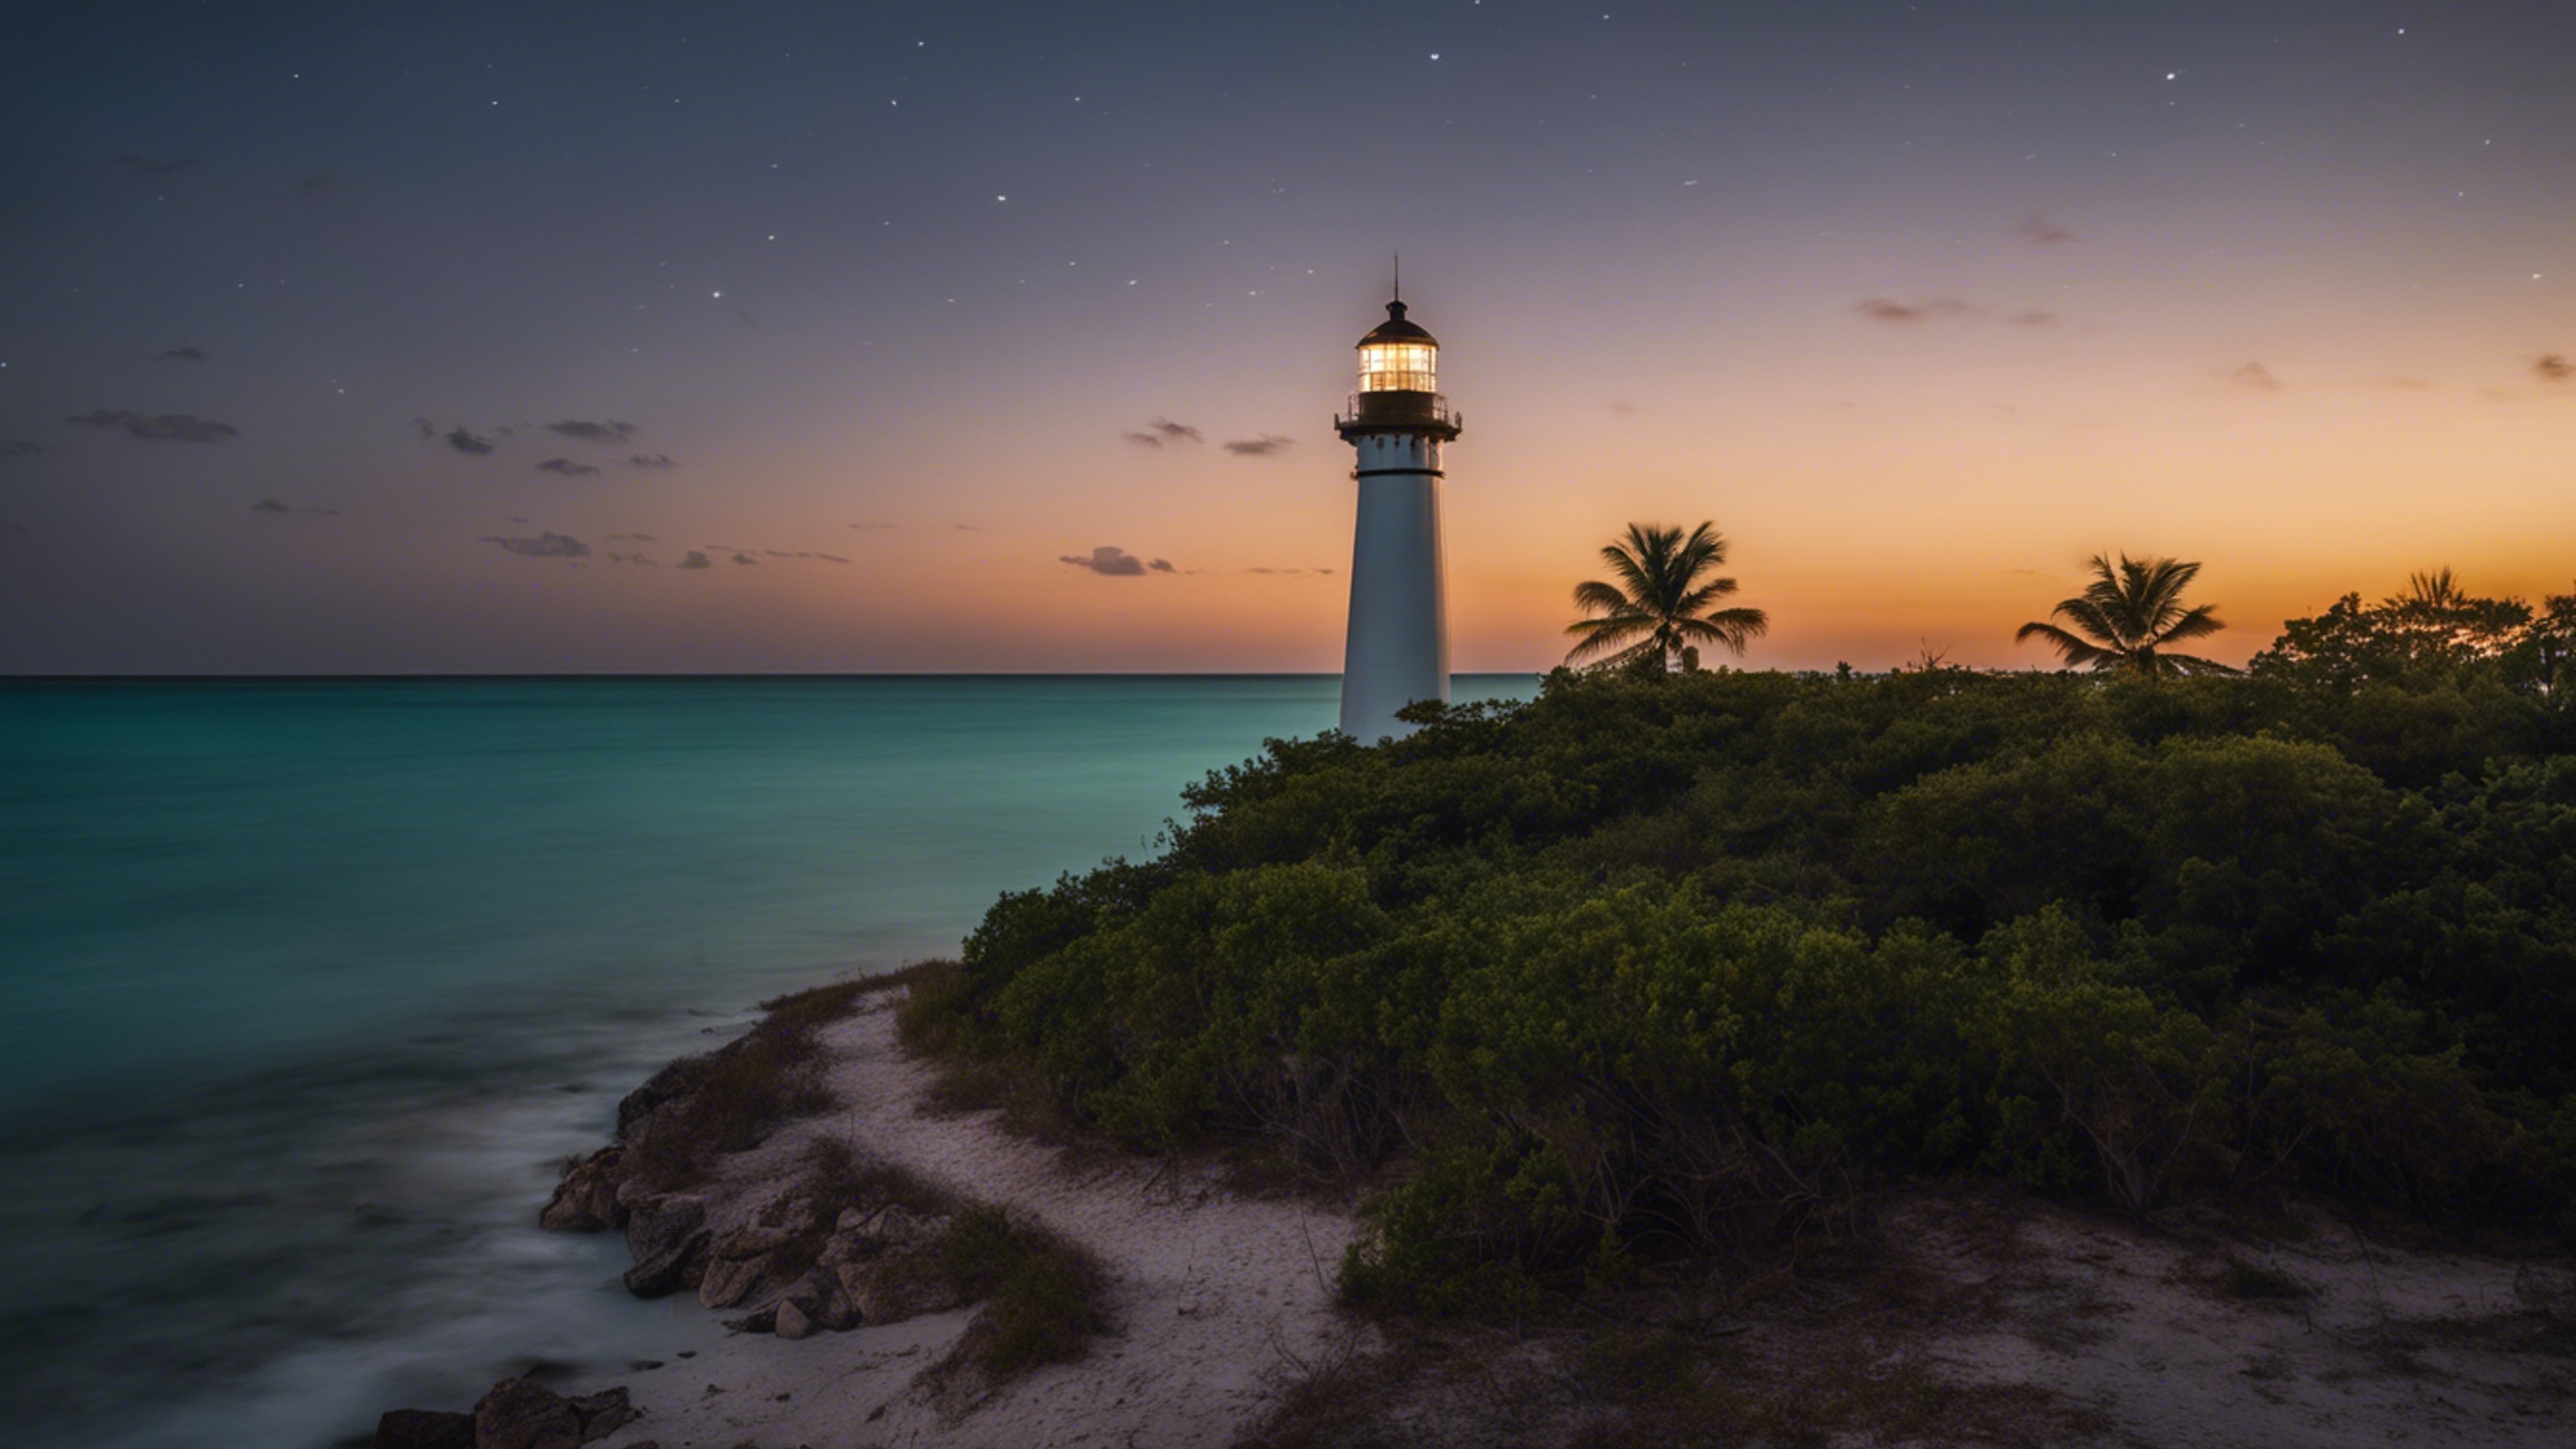 A night shot of an historic lighthouse in Key Biscayne, with the beam of light cutting through the darkness. Wallpaper[4d5993bb763c4a90b239]